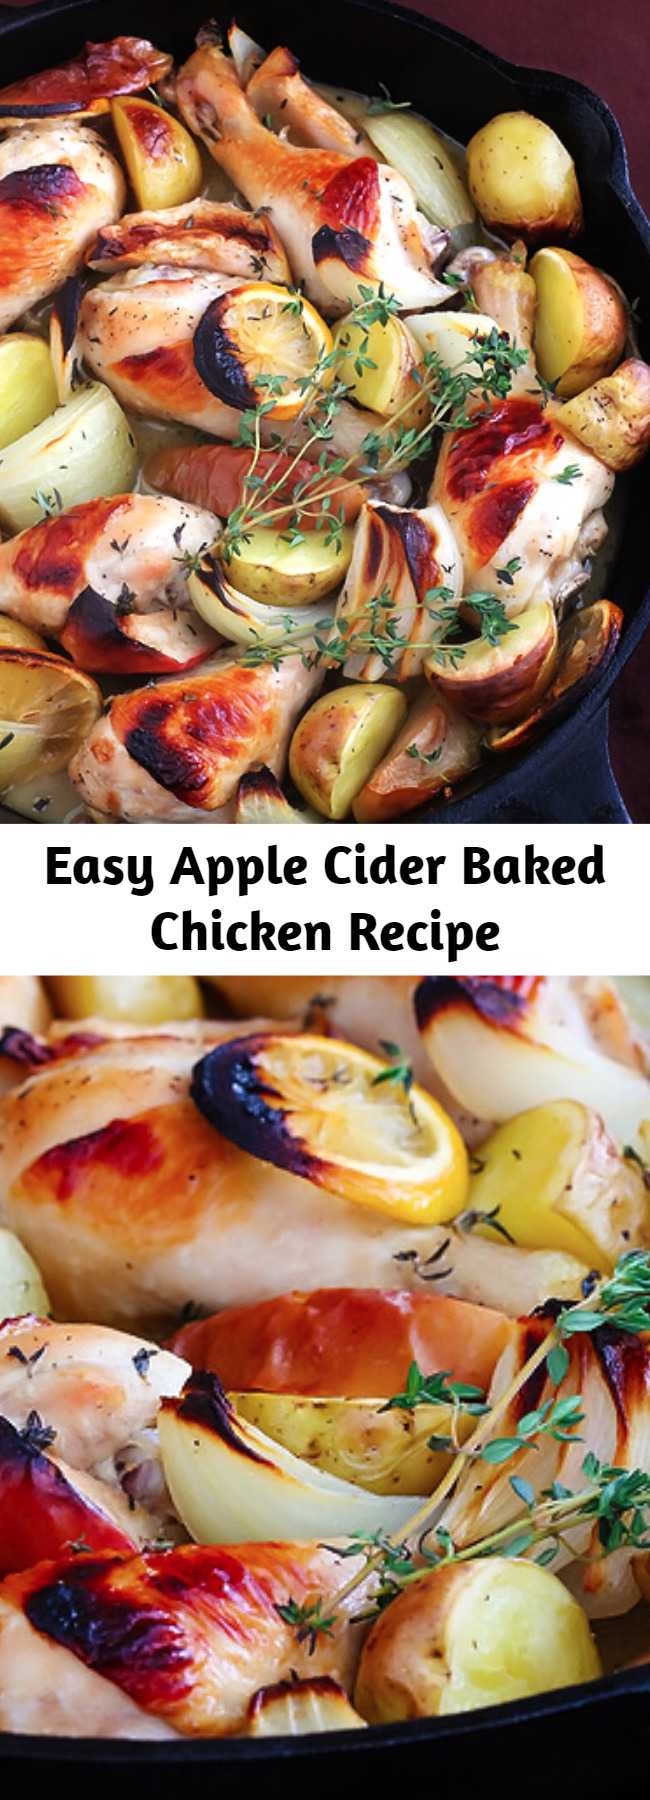 Easy Apple Cider Baked Chicken Recipe - Love apples and chicken? Then you are sure to love this Apple Cider Baked Chicken recipe! Blend your easy dinner favorites with the flavor of the season.